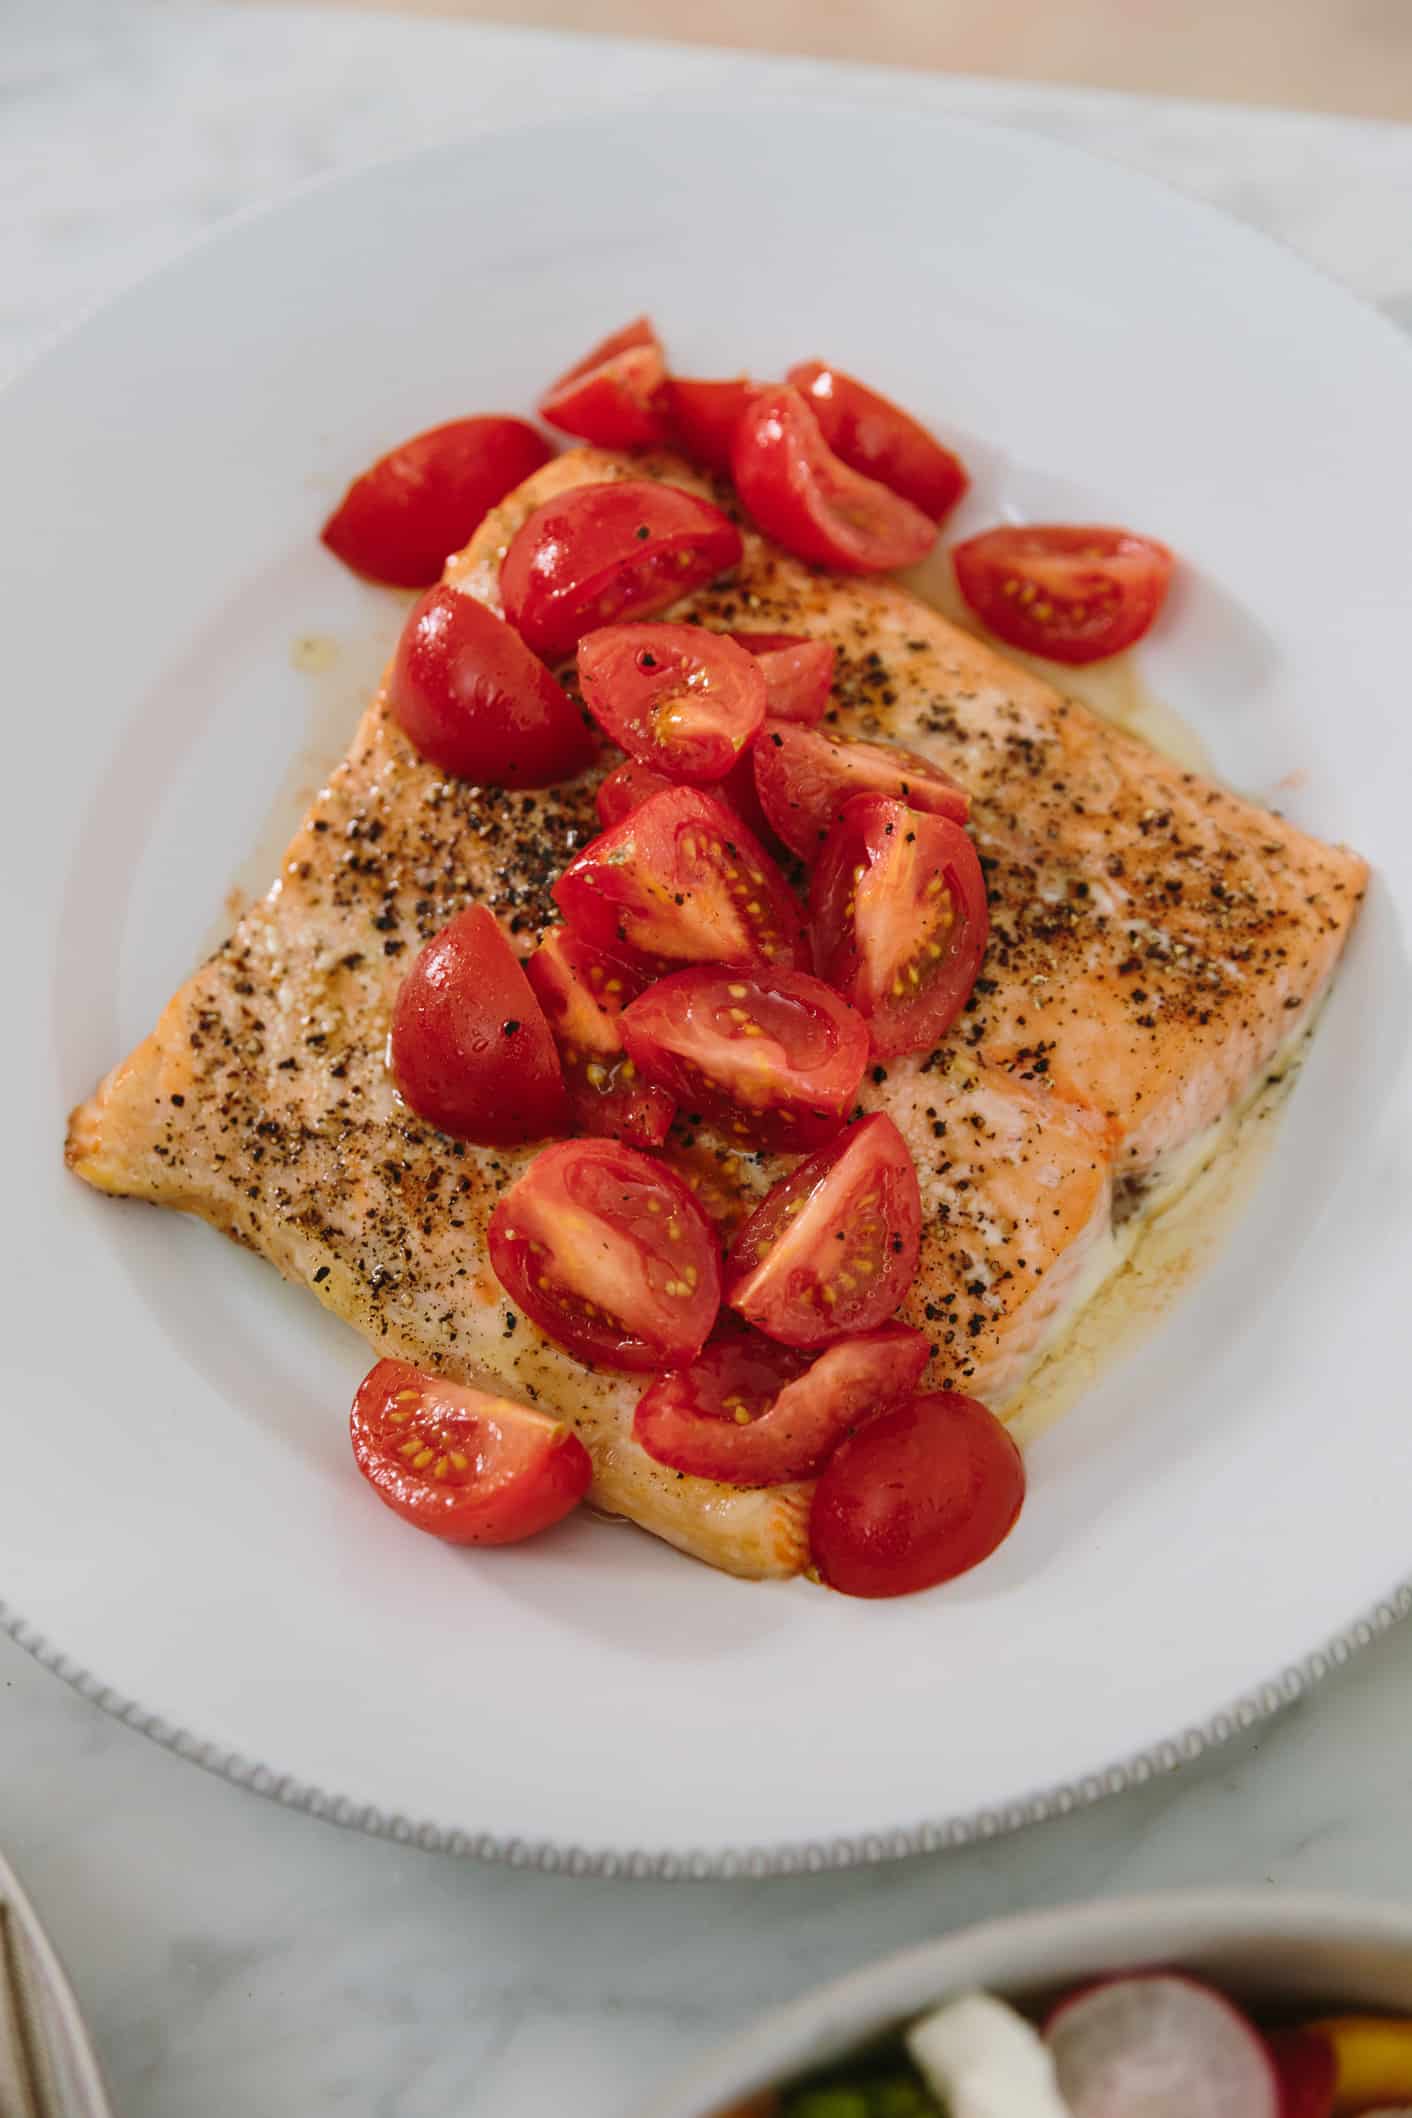 Louise Roe and Gaby Dalkin salmon and tomatoes recipe